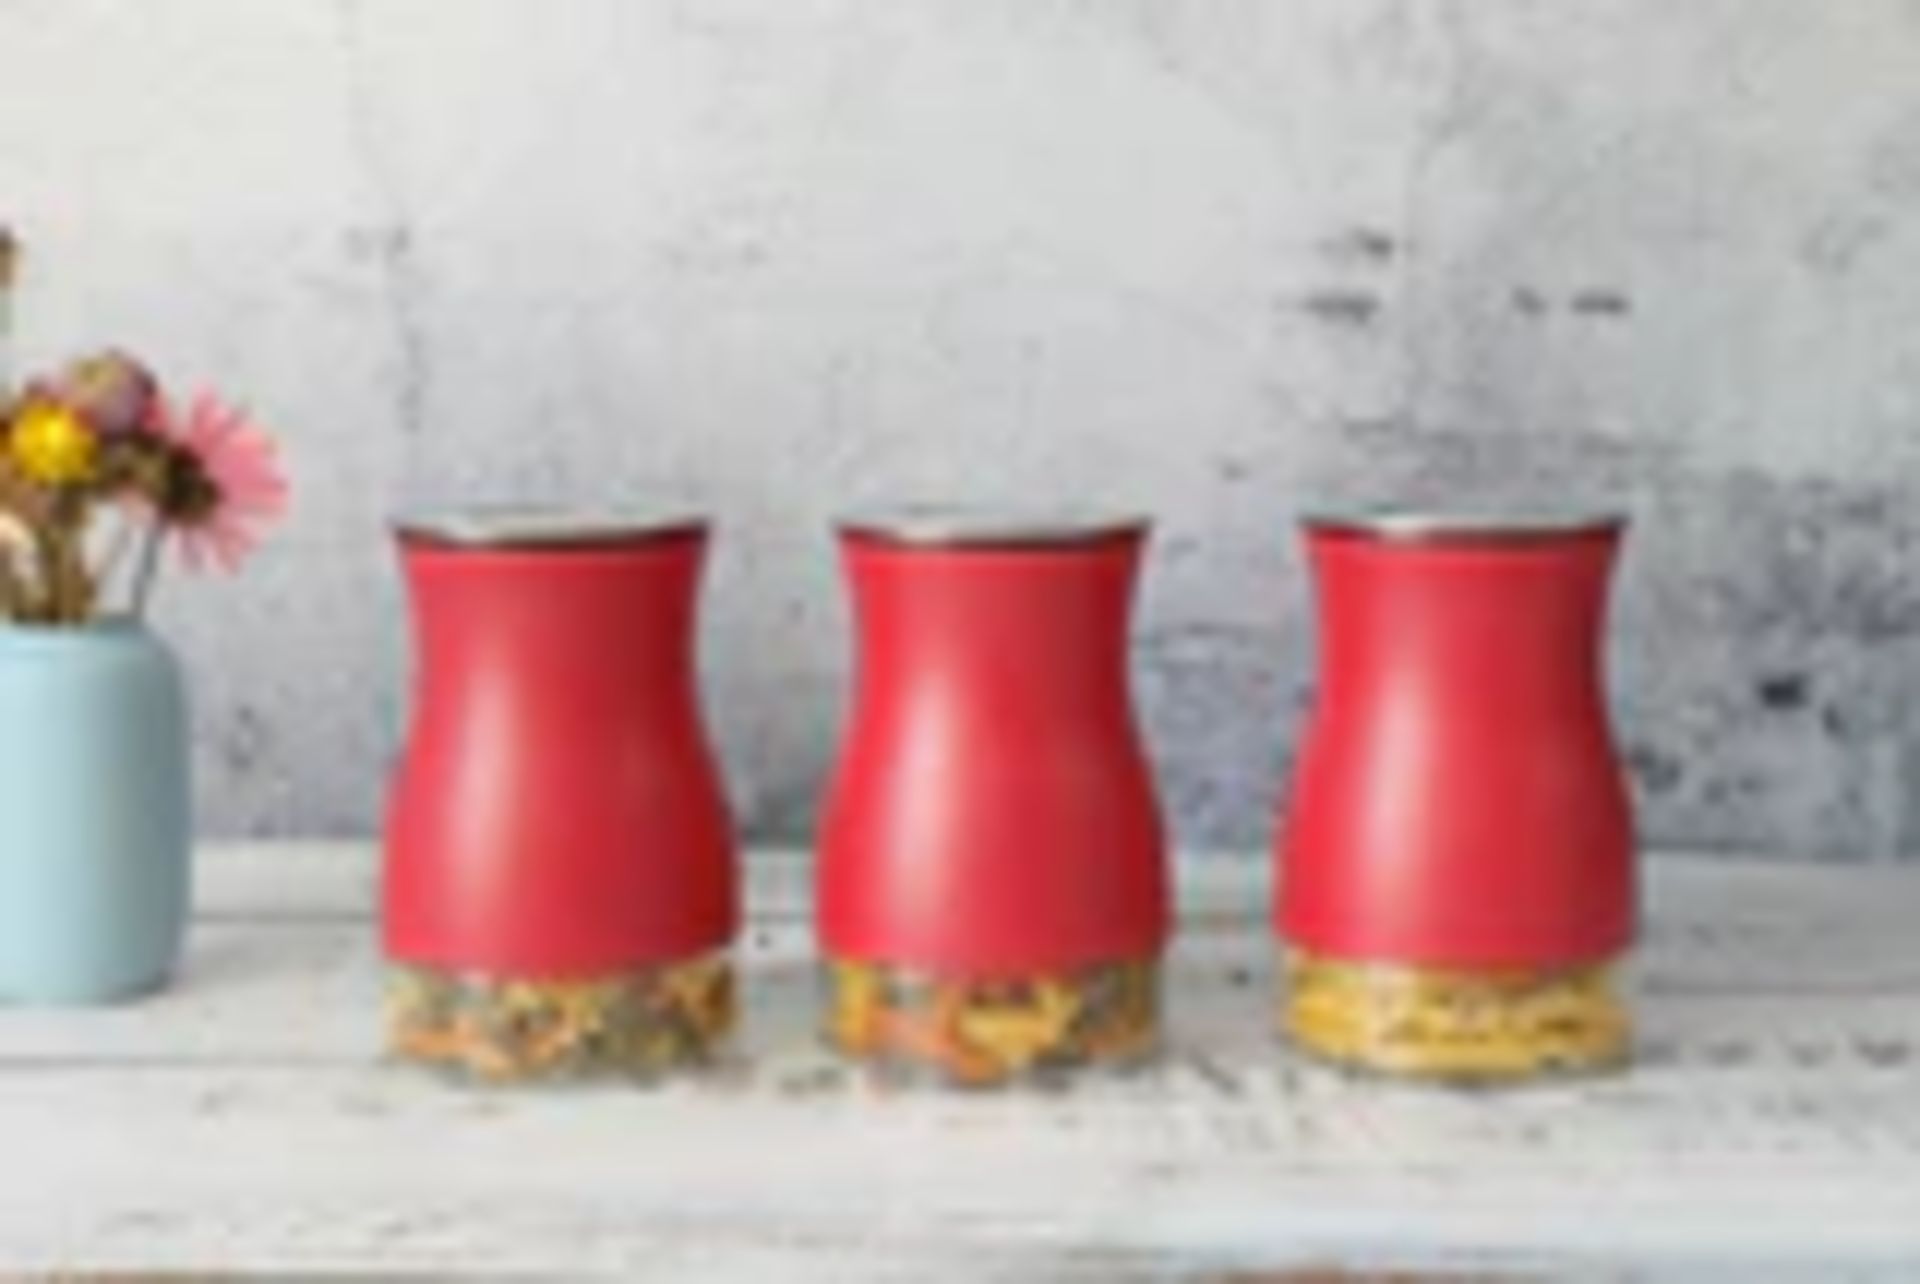 Brand New 3 PC Kitchen Canisters Red